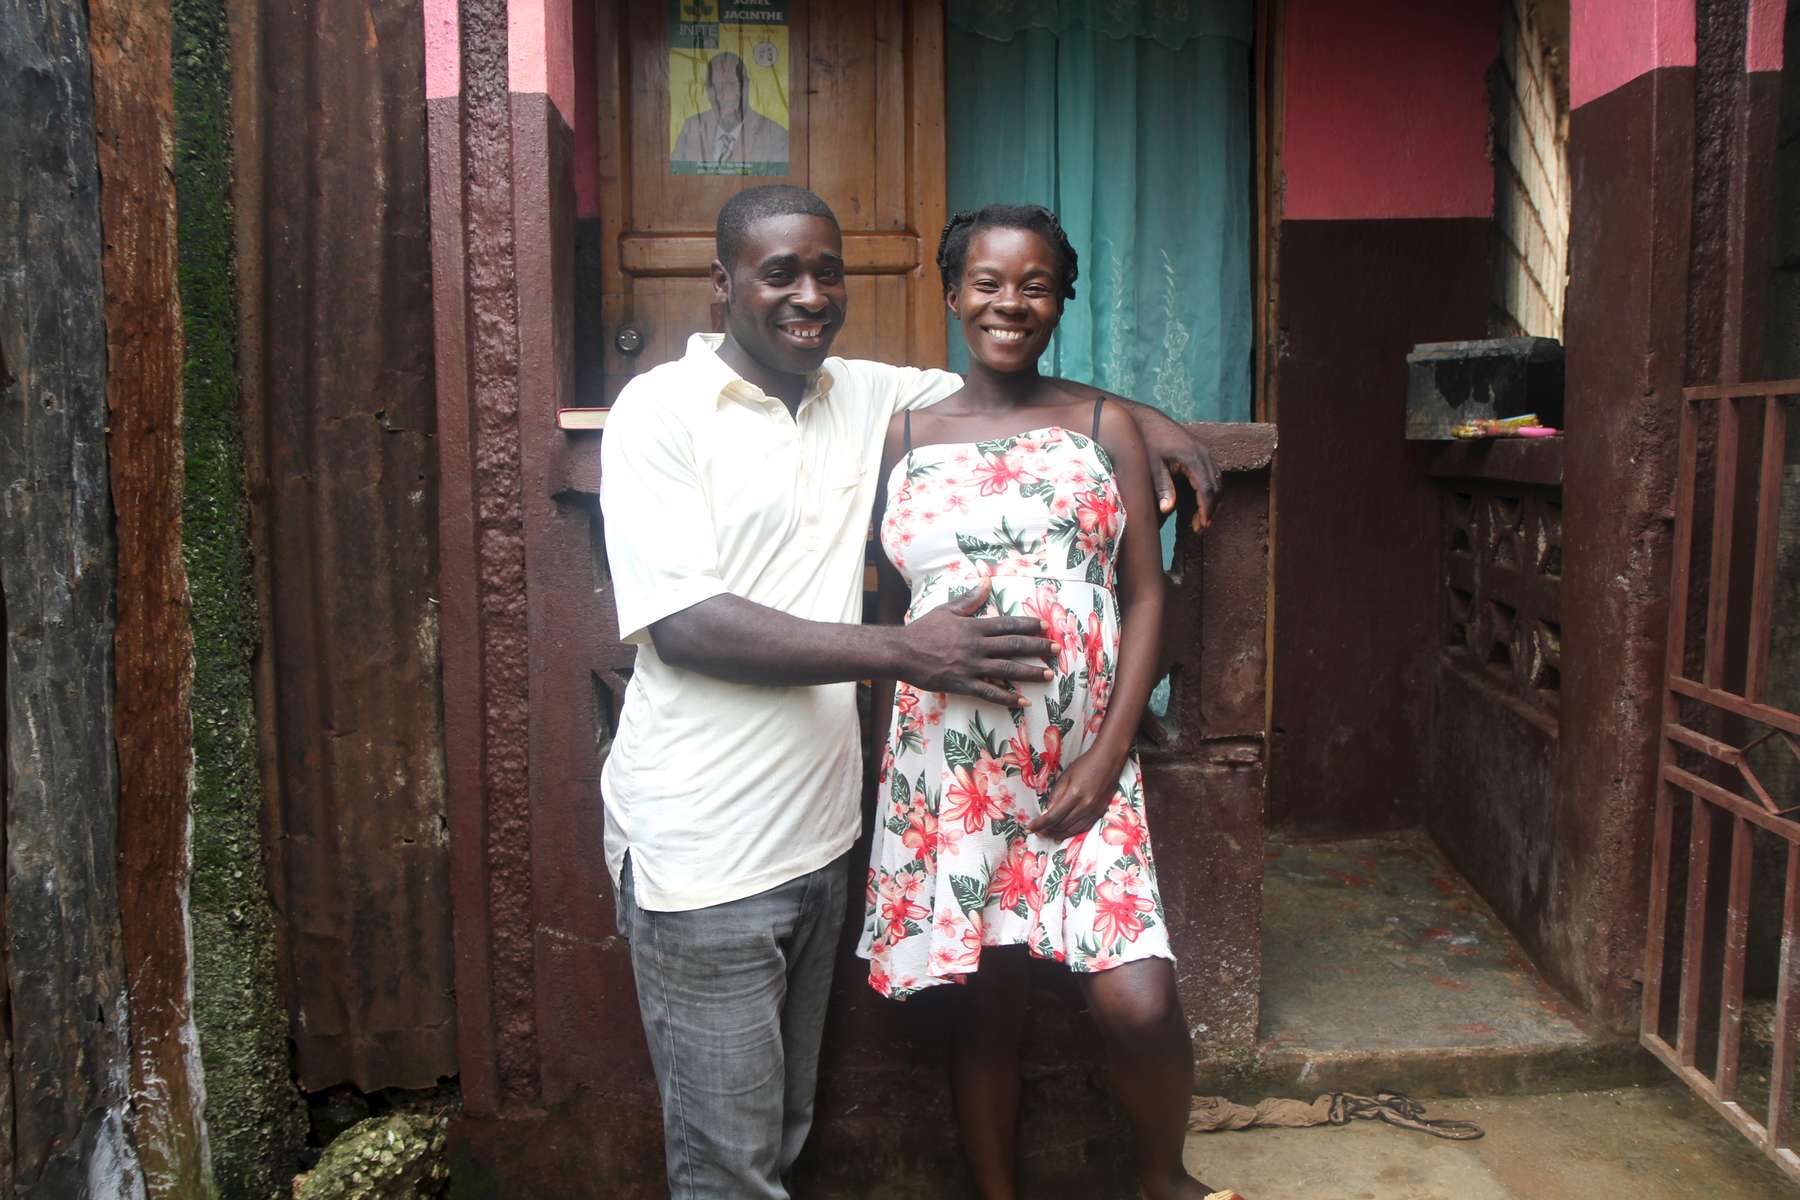 Janine Alexis, 30 years old awaiting the birth of her baby girl on December 6 with her husband Ysmaille.